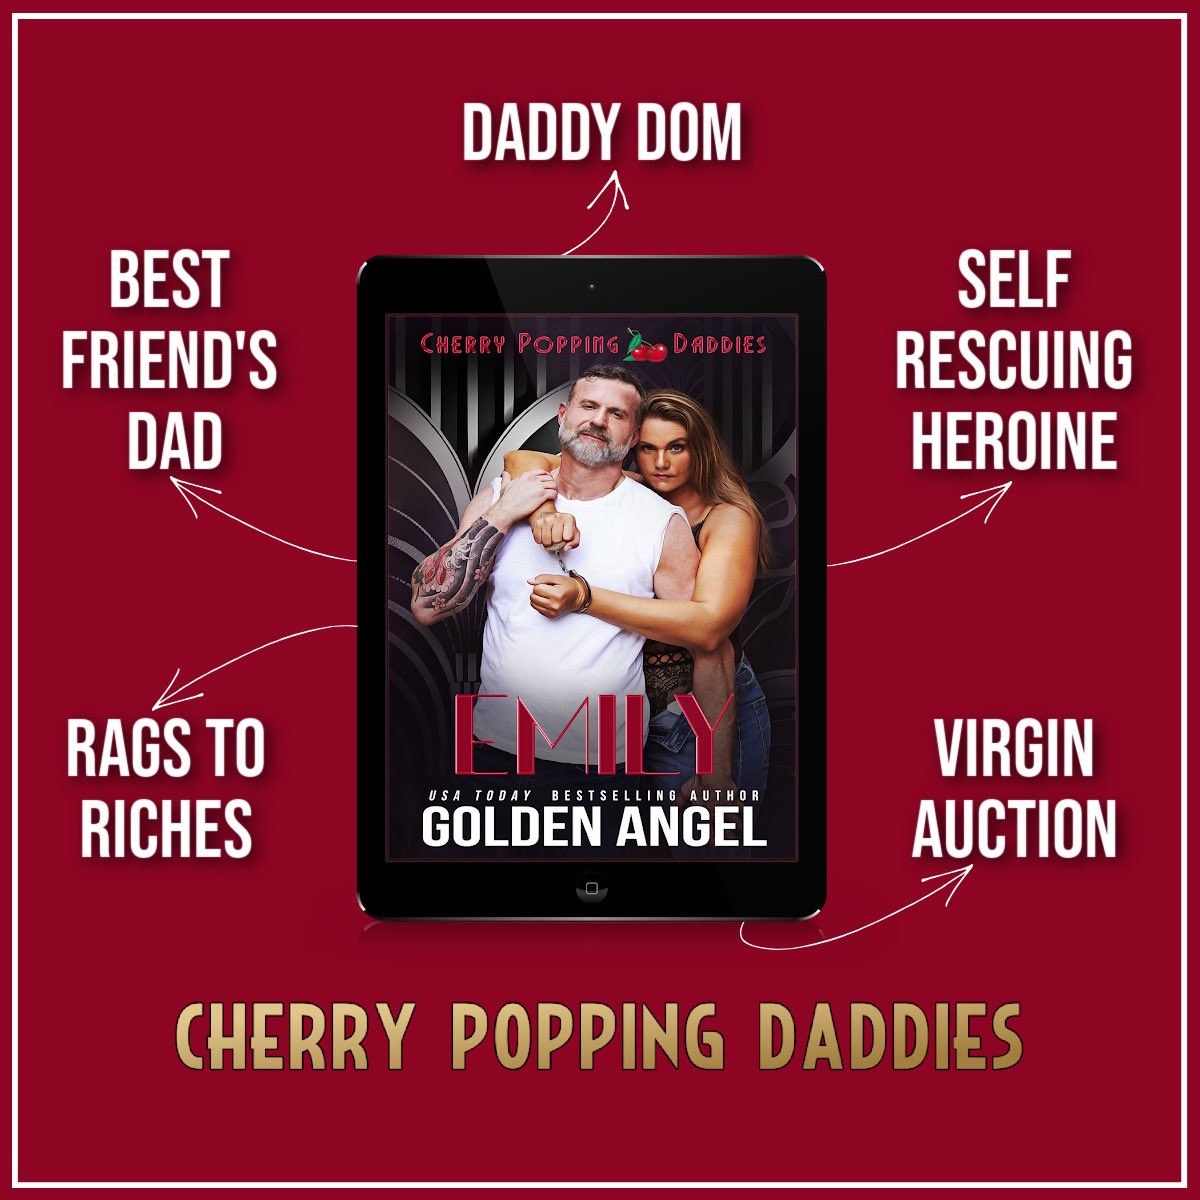 🍒 THESE BIG DADDIES ARE POPPIN' 🍒 Golden Angel Romances is bringing the heat and the sweet with Emily, part of the upcoming Cherry Popping Daddies series by supporting the Kickstarter campaign! Check it out today and make your bid. geni.us/CPDKickstarter